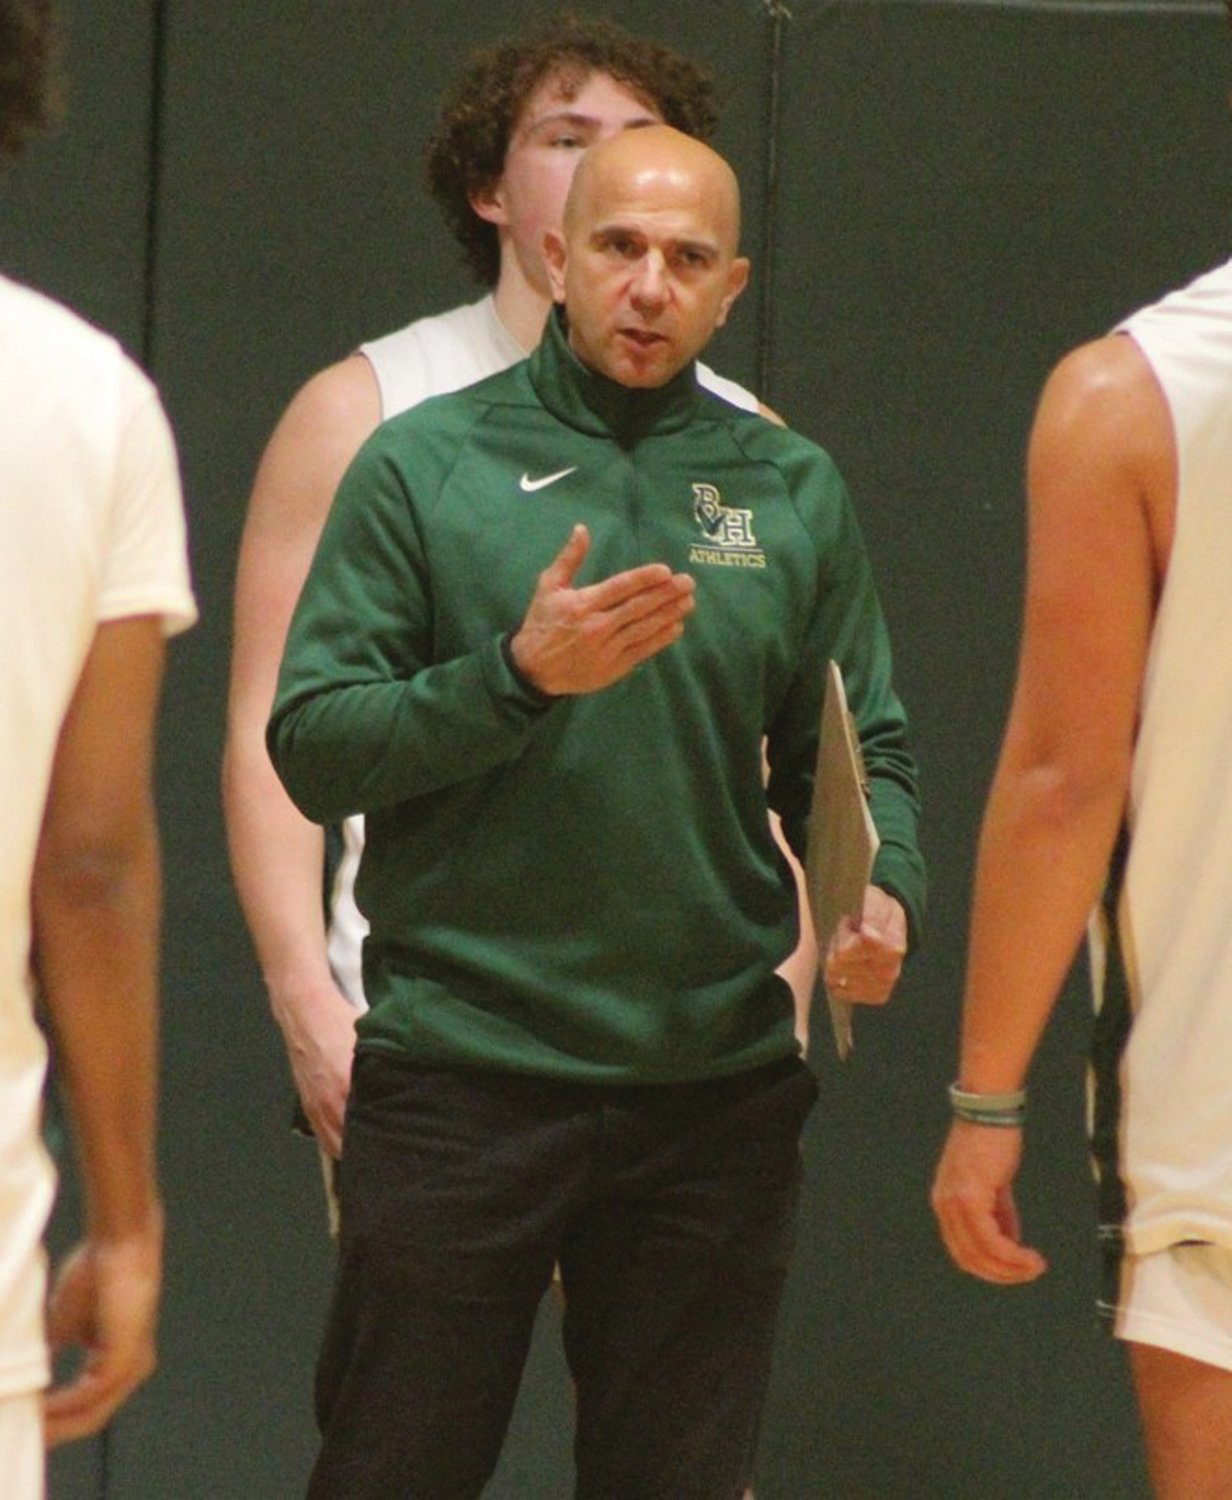 PRACTICE MAKES PERFECT: Hendricken coach Jamal Gomes works with players at practice on Tuesday night in preparation for the upcoming season.